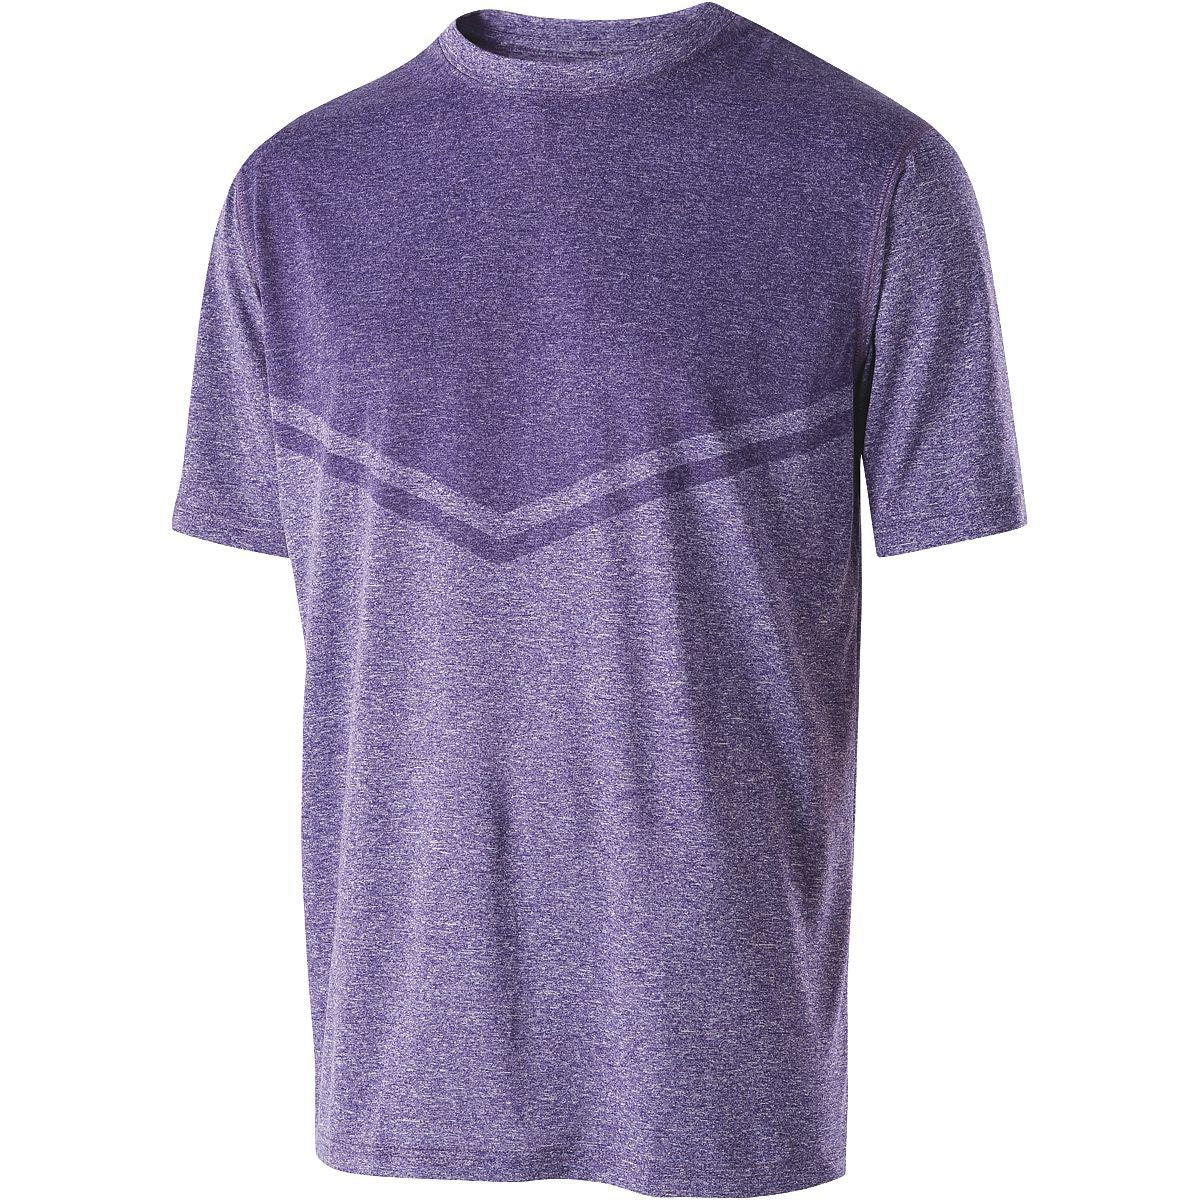 Holloway Seismic Tee in Purple Heather  -Part of the Adult, Adult-Tee-Shirt, T-Shirts, Holloway, Shirts product lines at KanaleyCreations.com